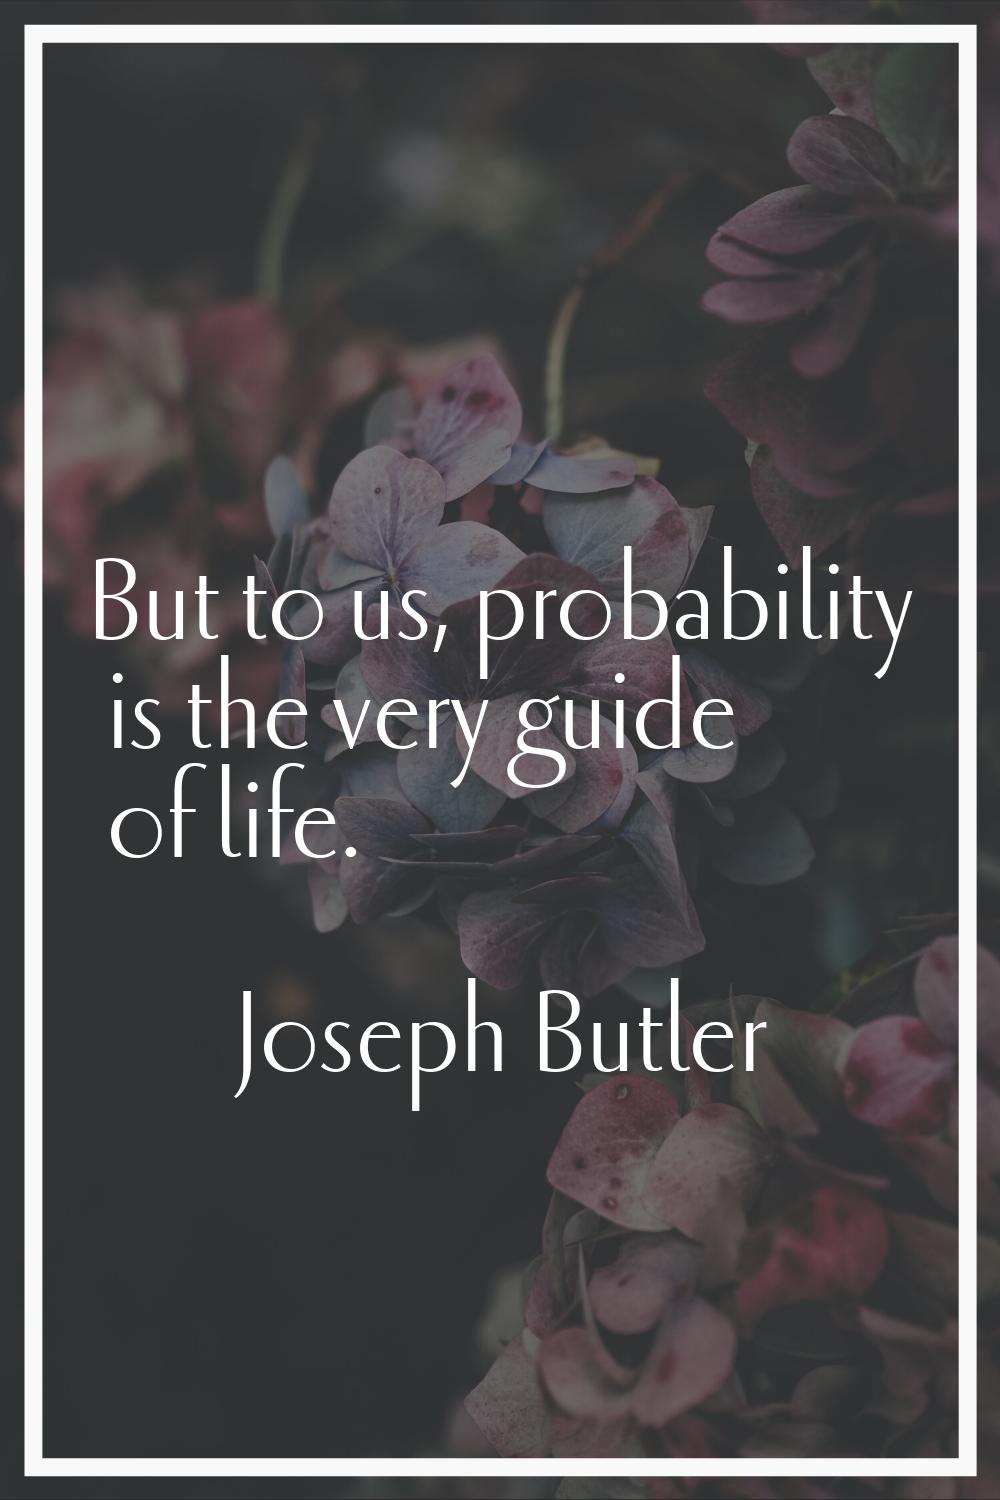 But to us, probability is the very guide of life.